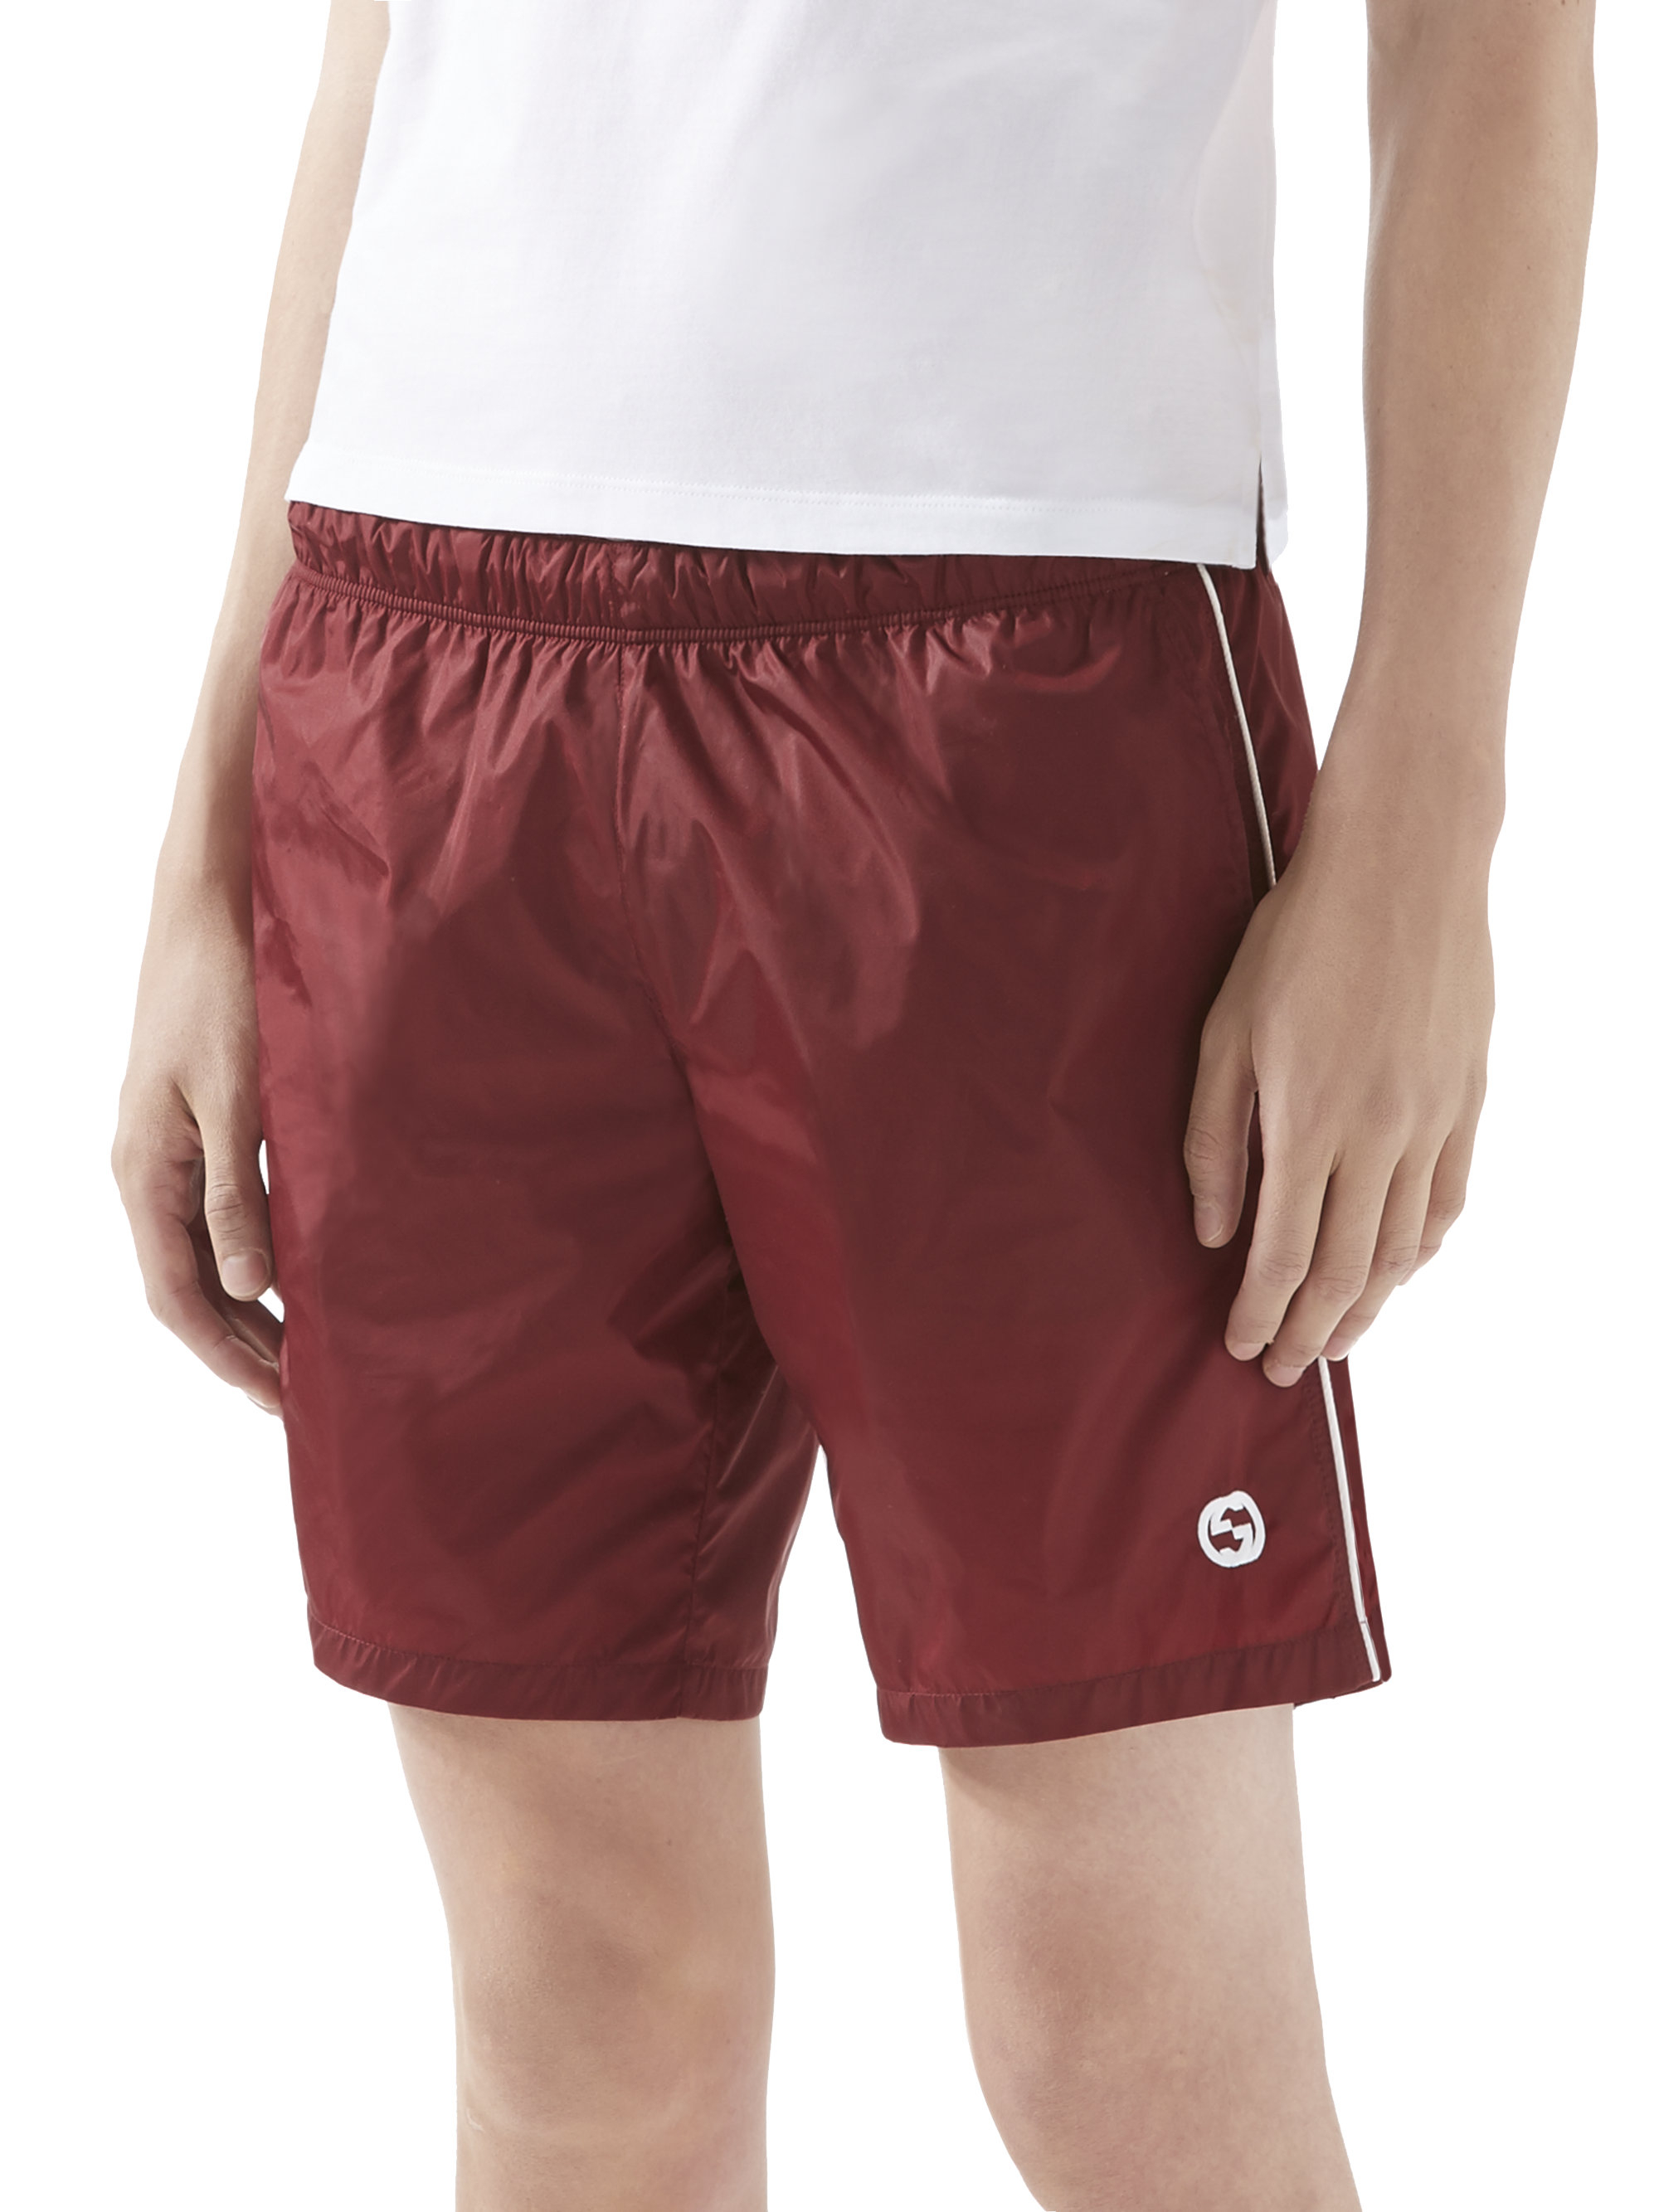 Gucci Technical Nylon Swim Shorts in Red for Men - Lyst